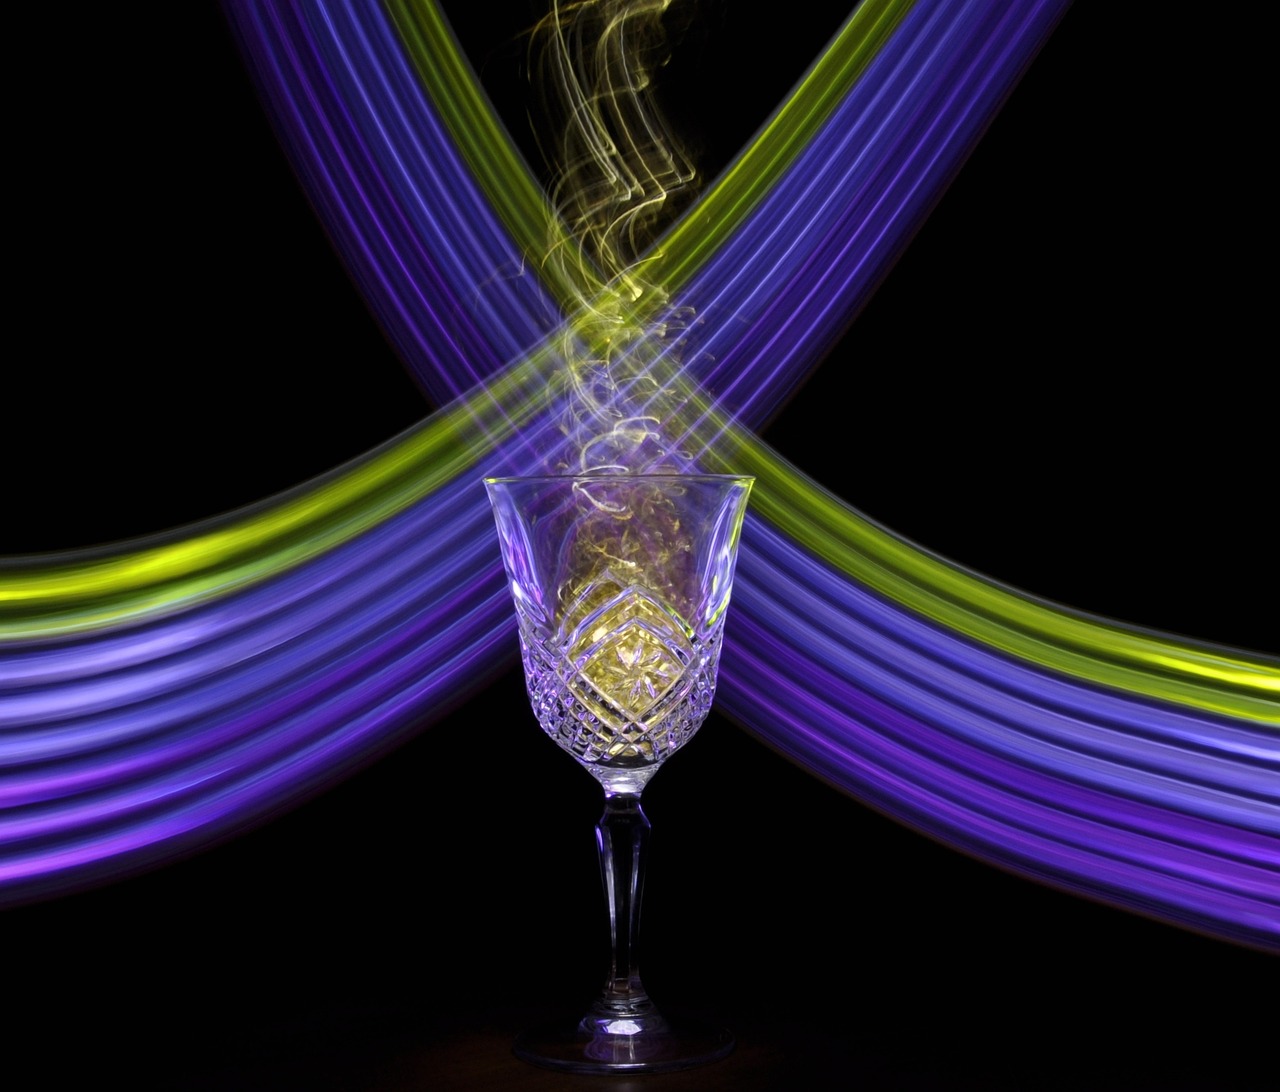 Light Painting Tutorial, How To Light Paint A Spiral